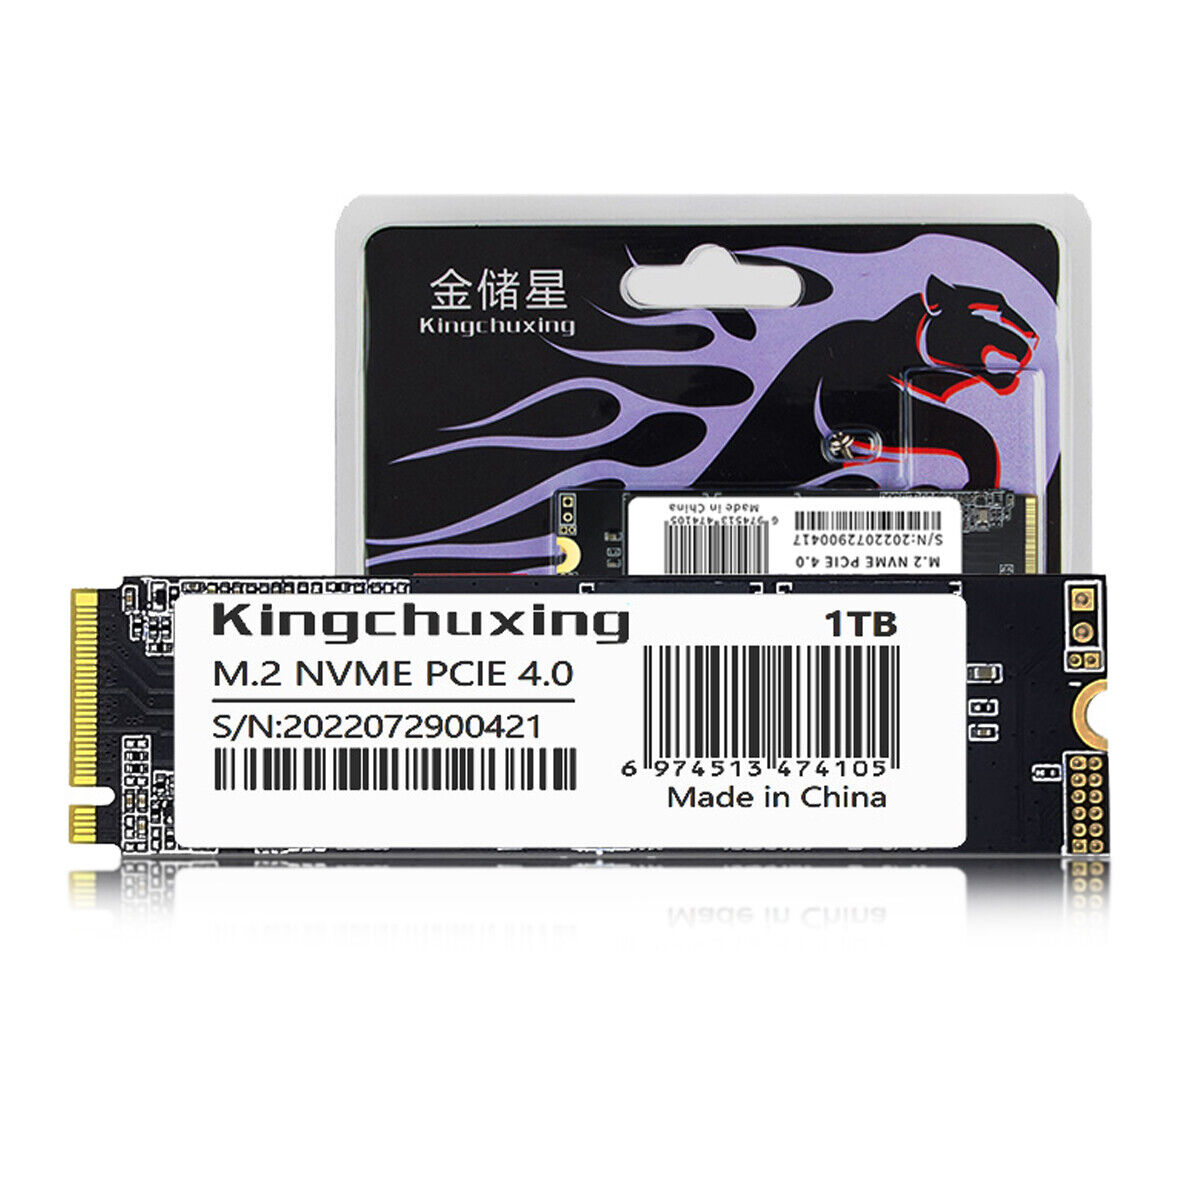 Kingchuxing 512 SSD NVME PCIe 4.0 x 4 M.2 2280 Internal Gaming Solid State Drive